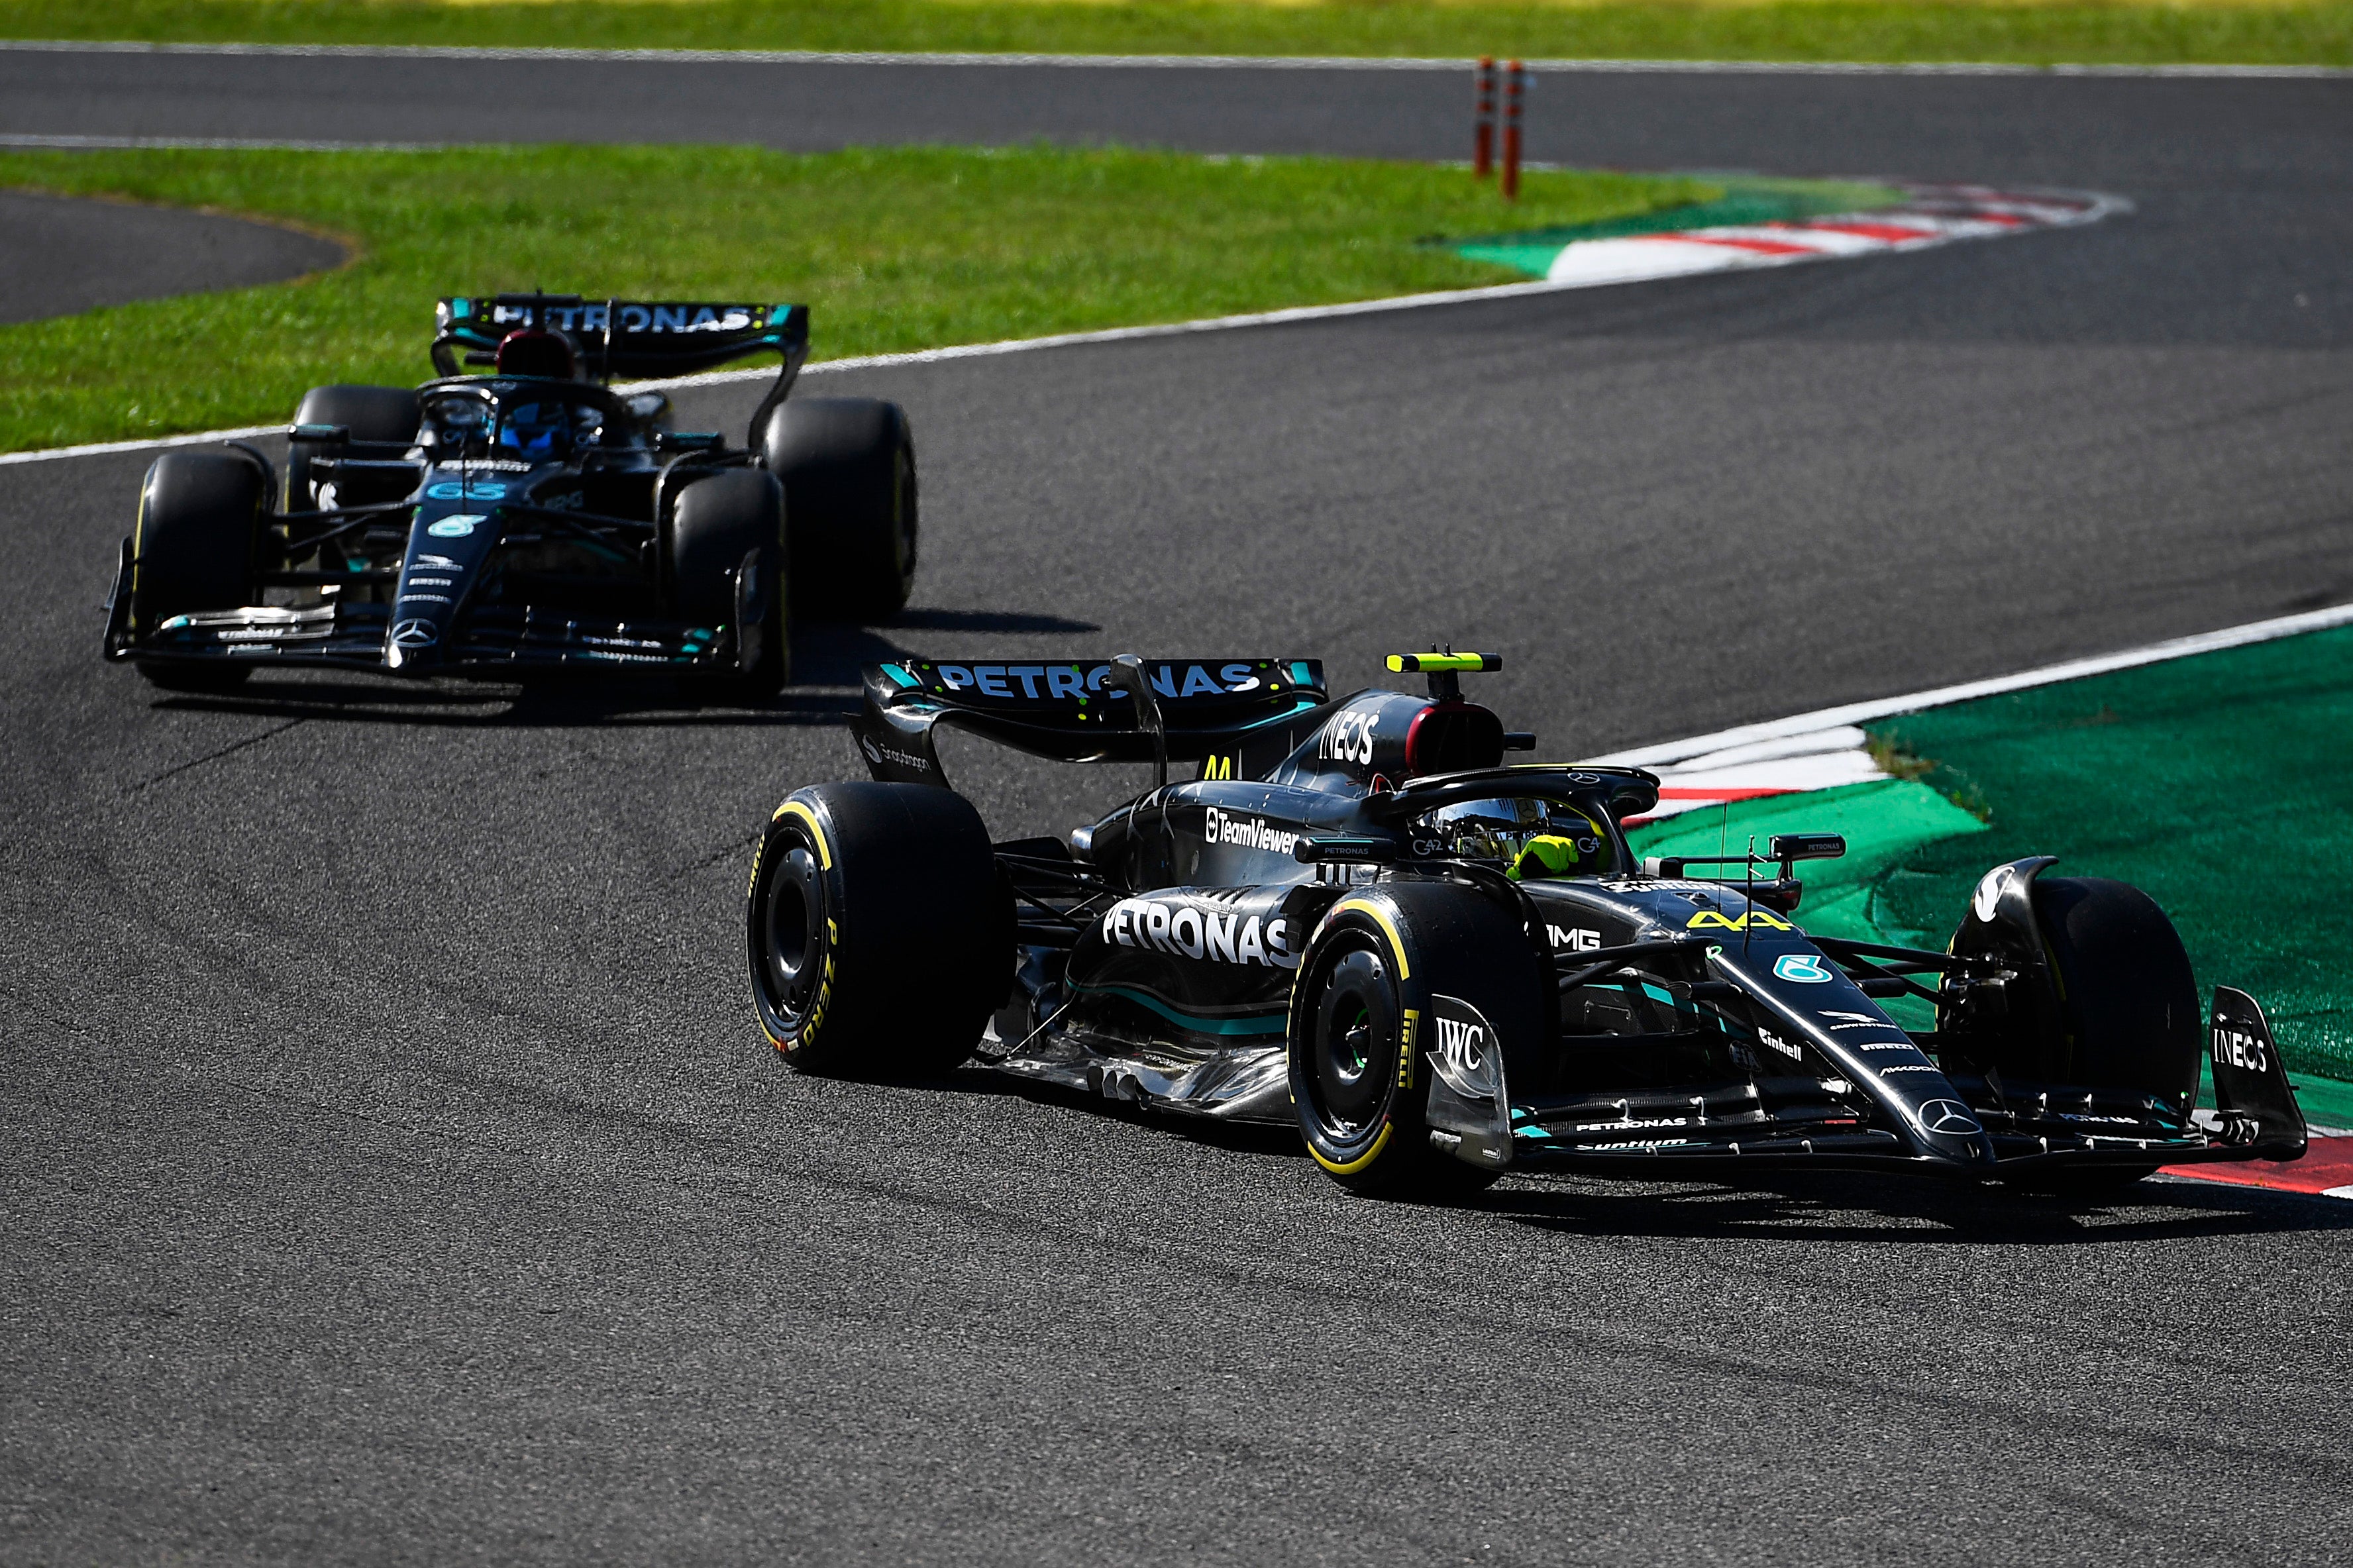 Lewis Hamilton and George Russell battled on track during Sunday’s race in Japan